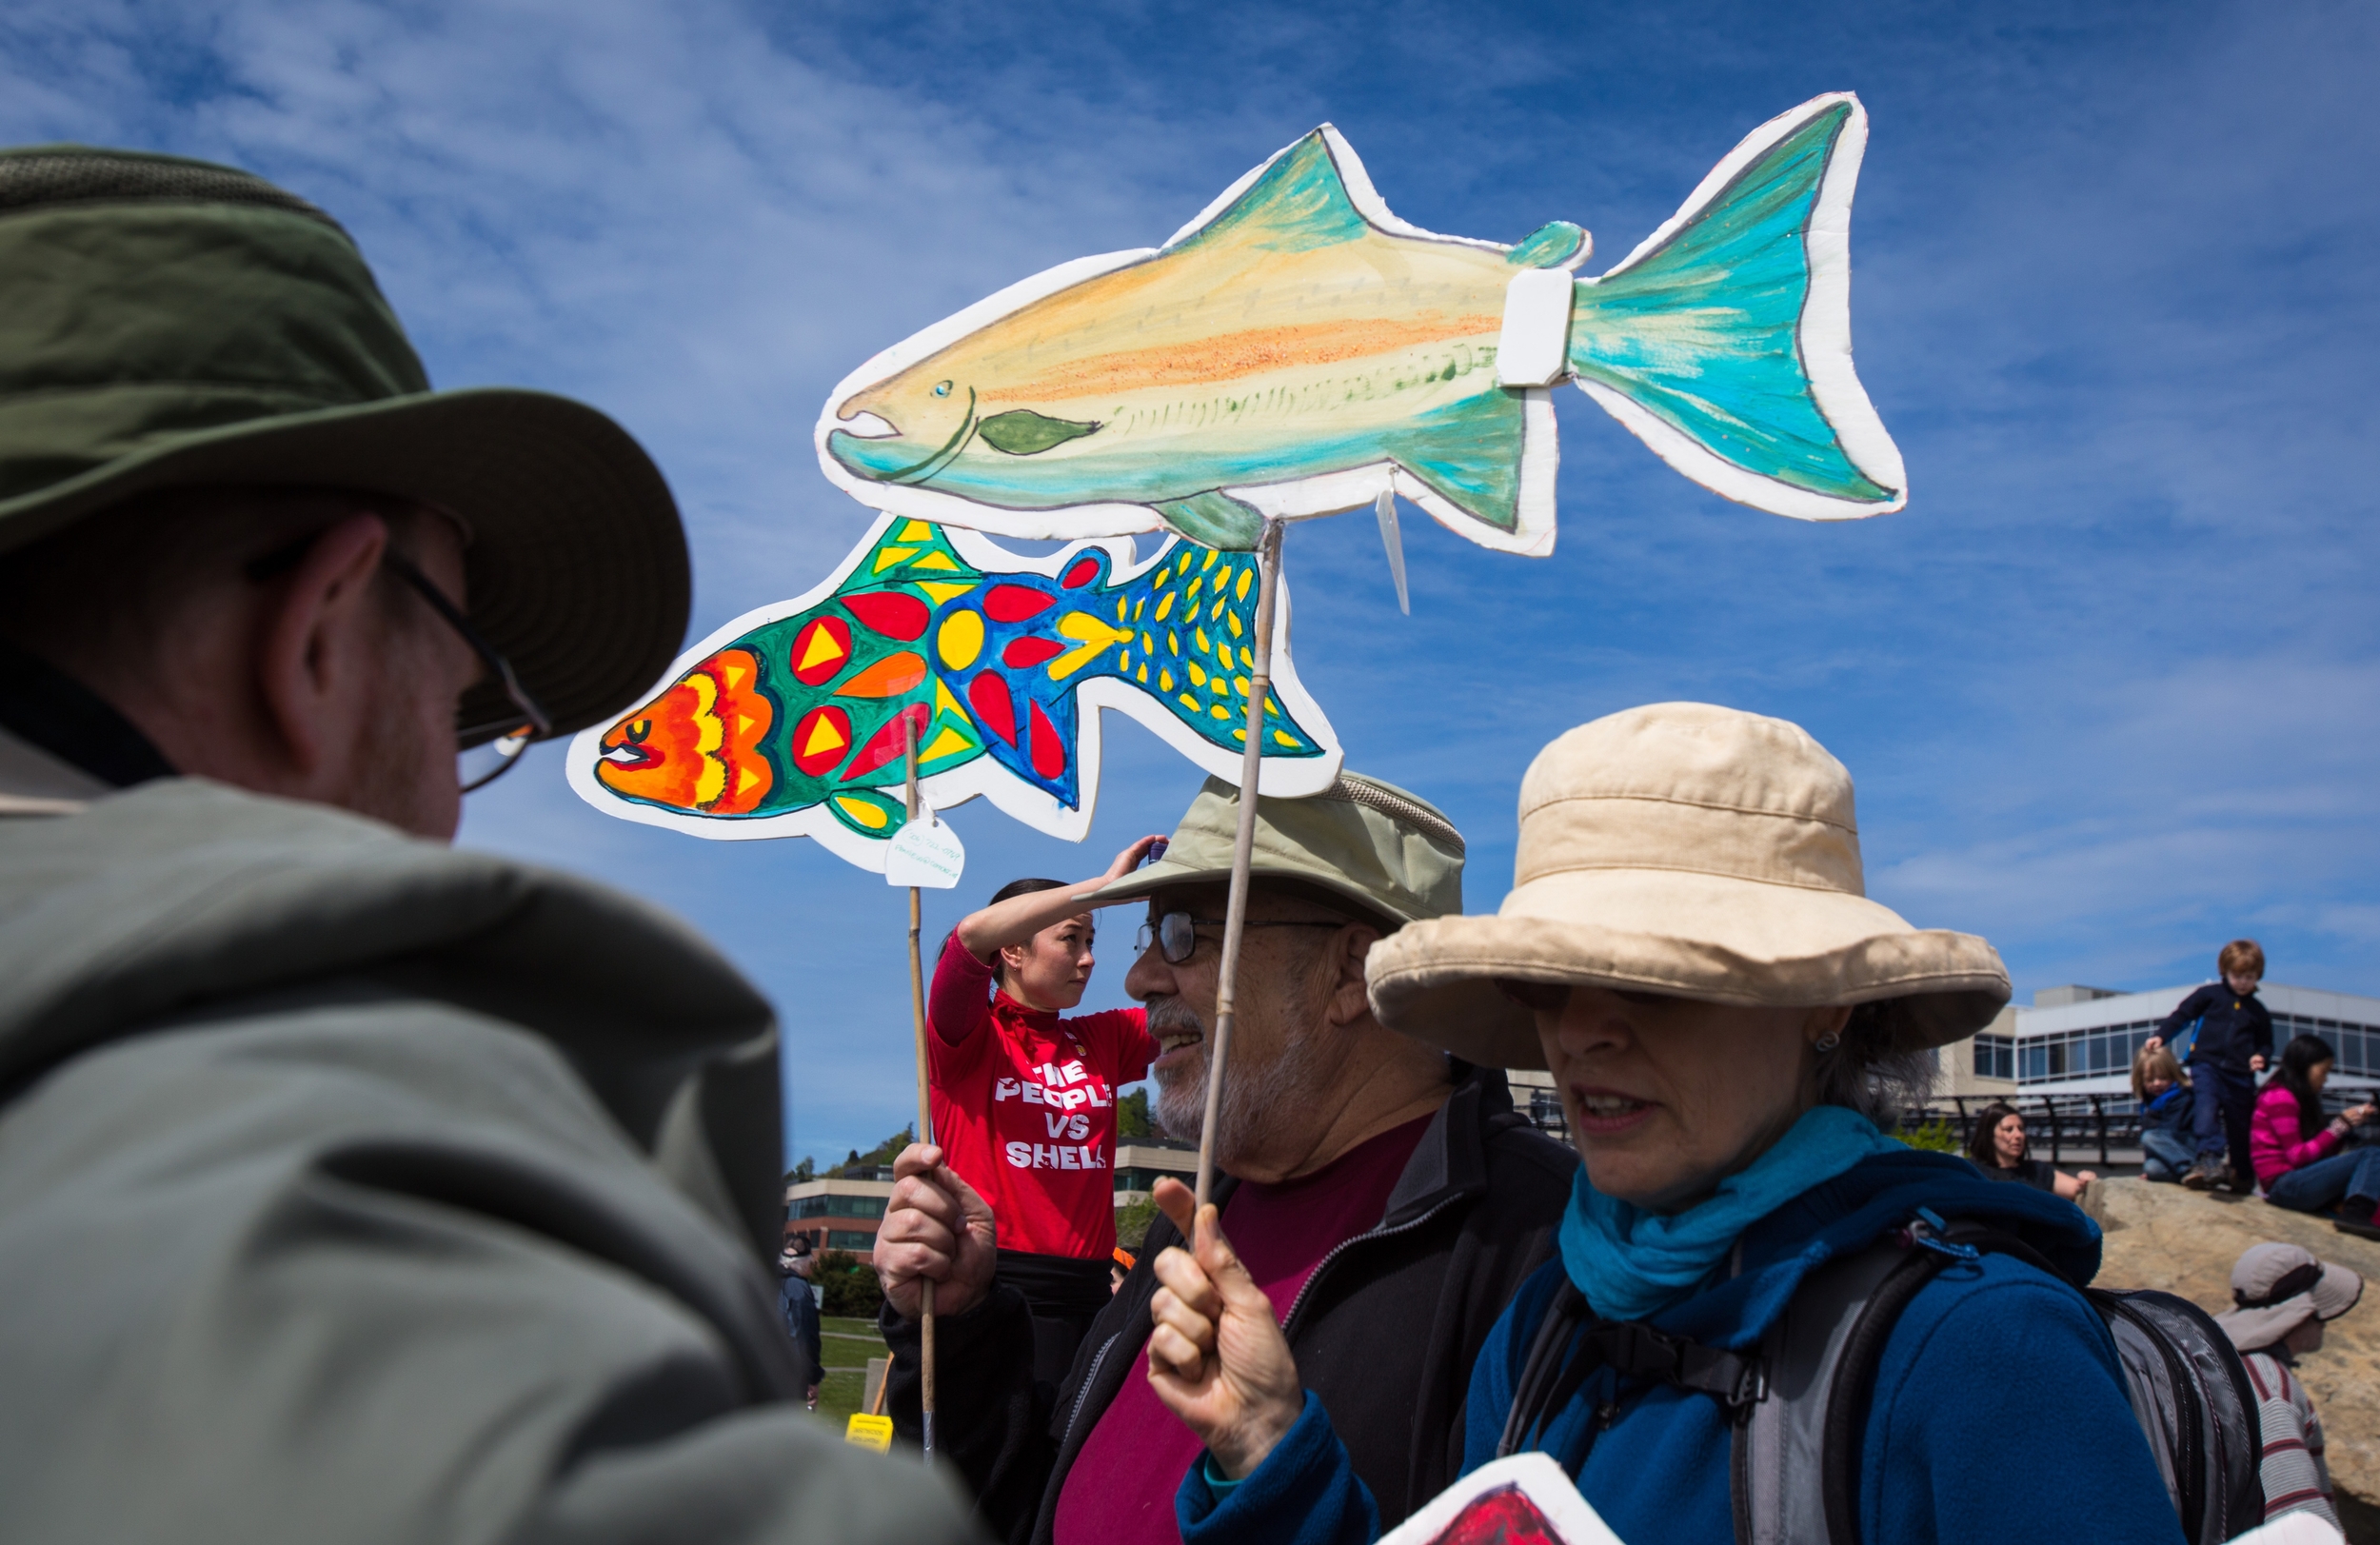   Protesters hold up paper fish during a protest against the planned arrival of Shell's oil drilling rig at Myrtle Edwards Park on Sunday, April 26, 2015. Hundreds gathered for the "Shell No: Seattle Draws the Line" protest organized by various organ